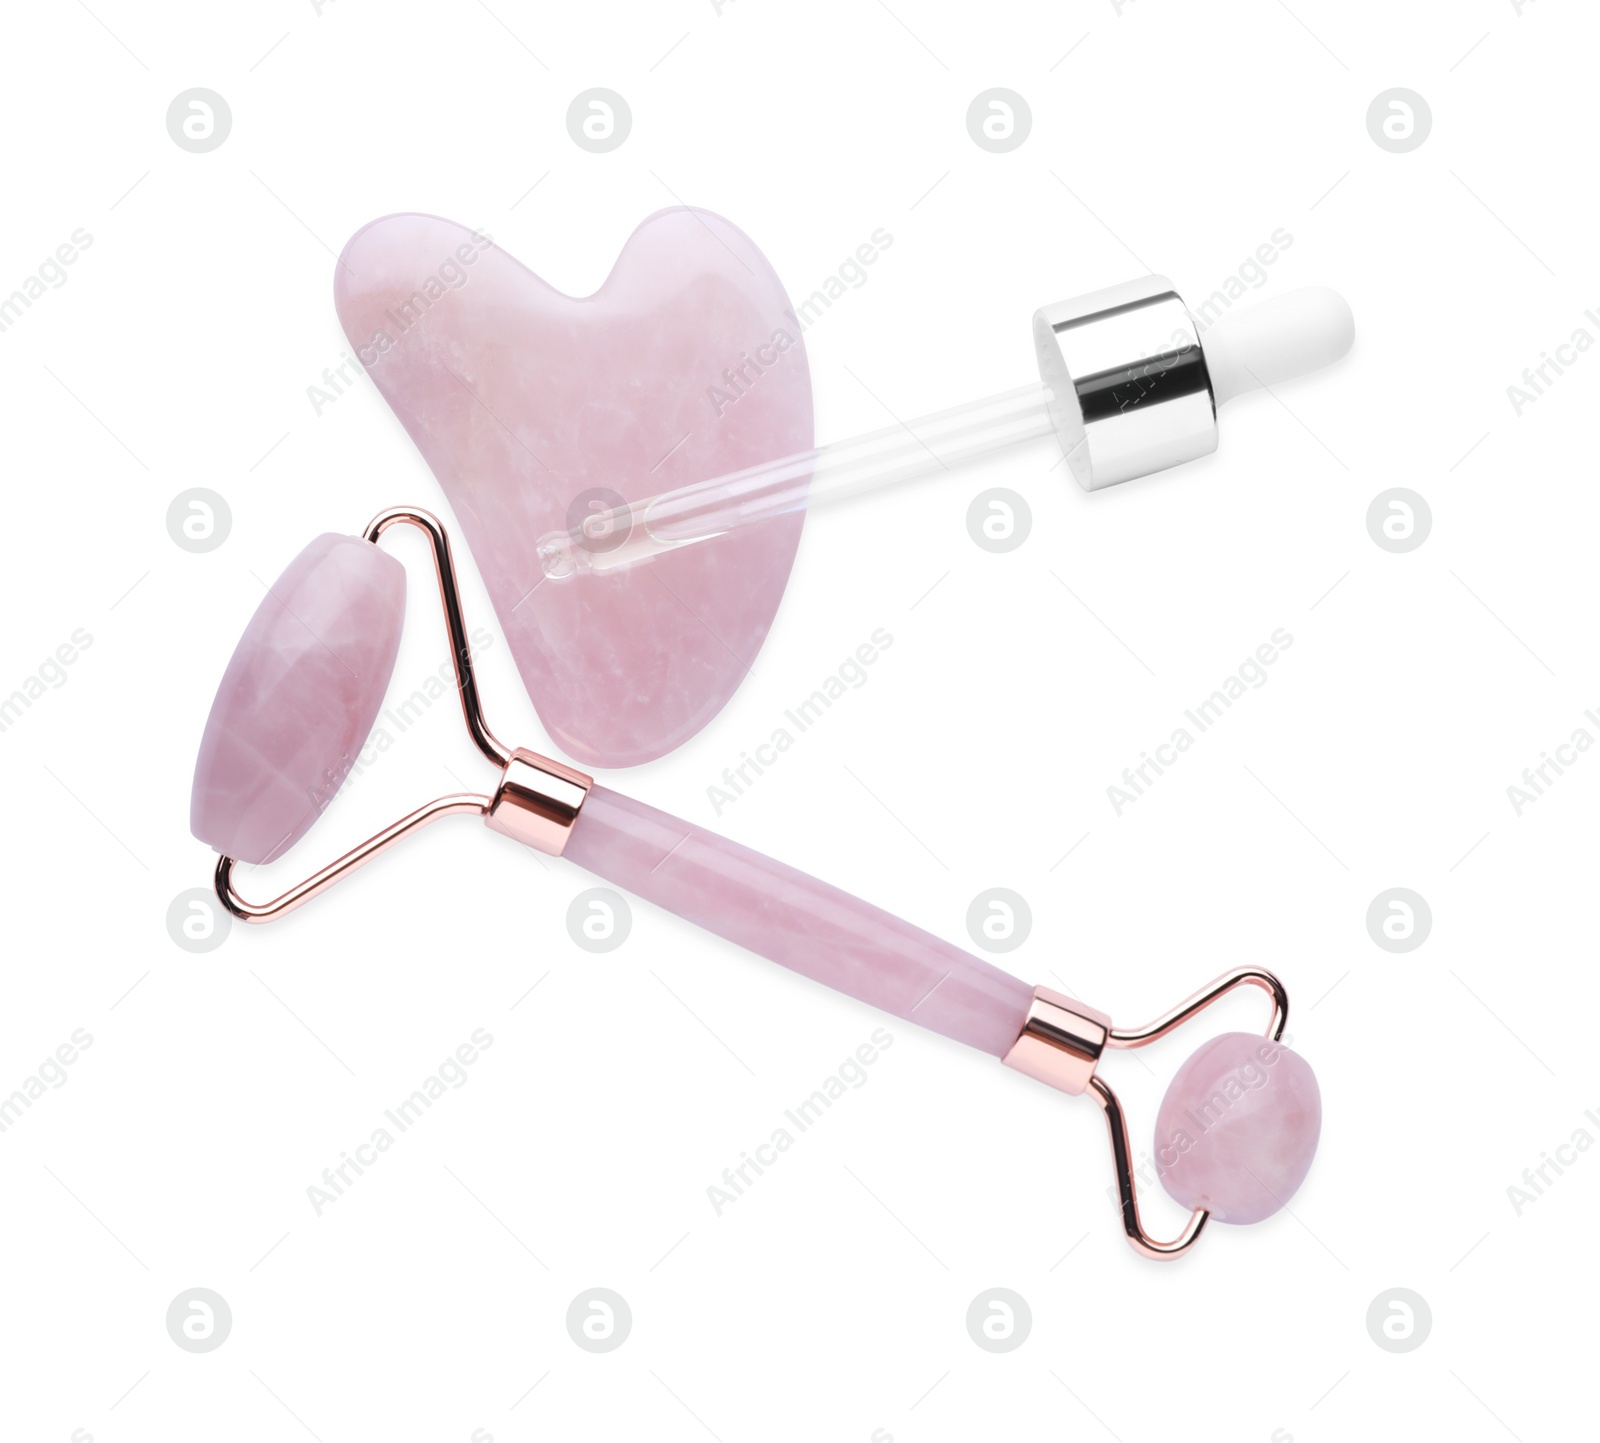 Photo of Rose quartz gua sha tool, facial roller and dropper isolated on white, top view